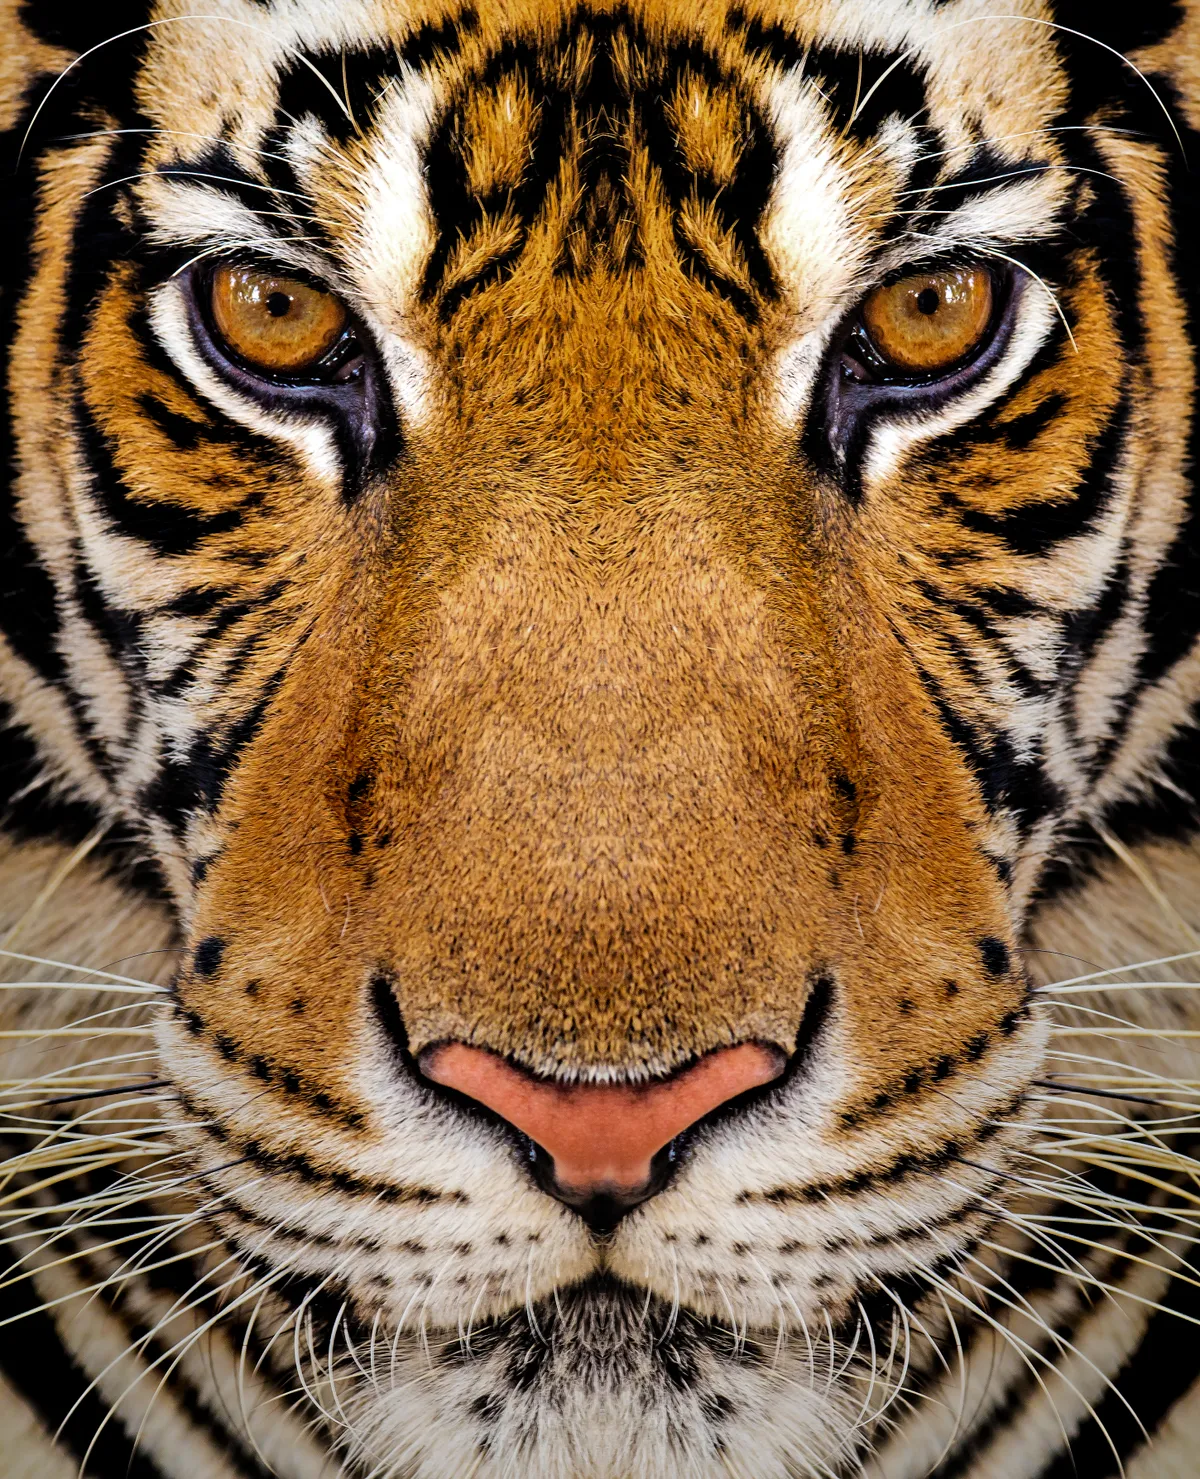 Tiger guide: species facts, how they hunt and where to see in the